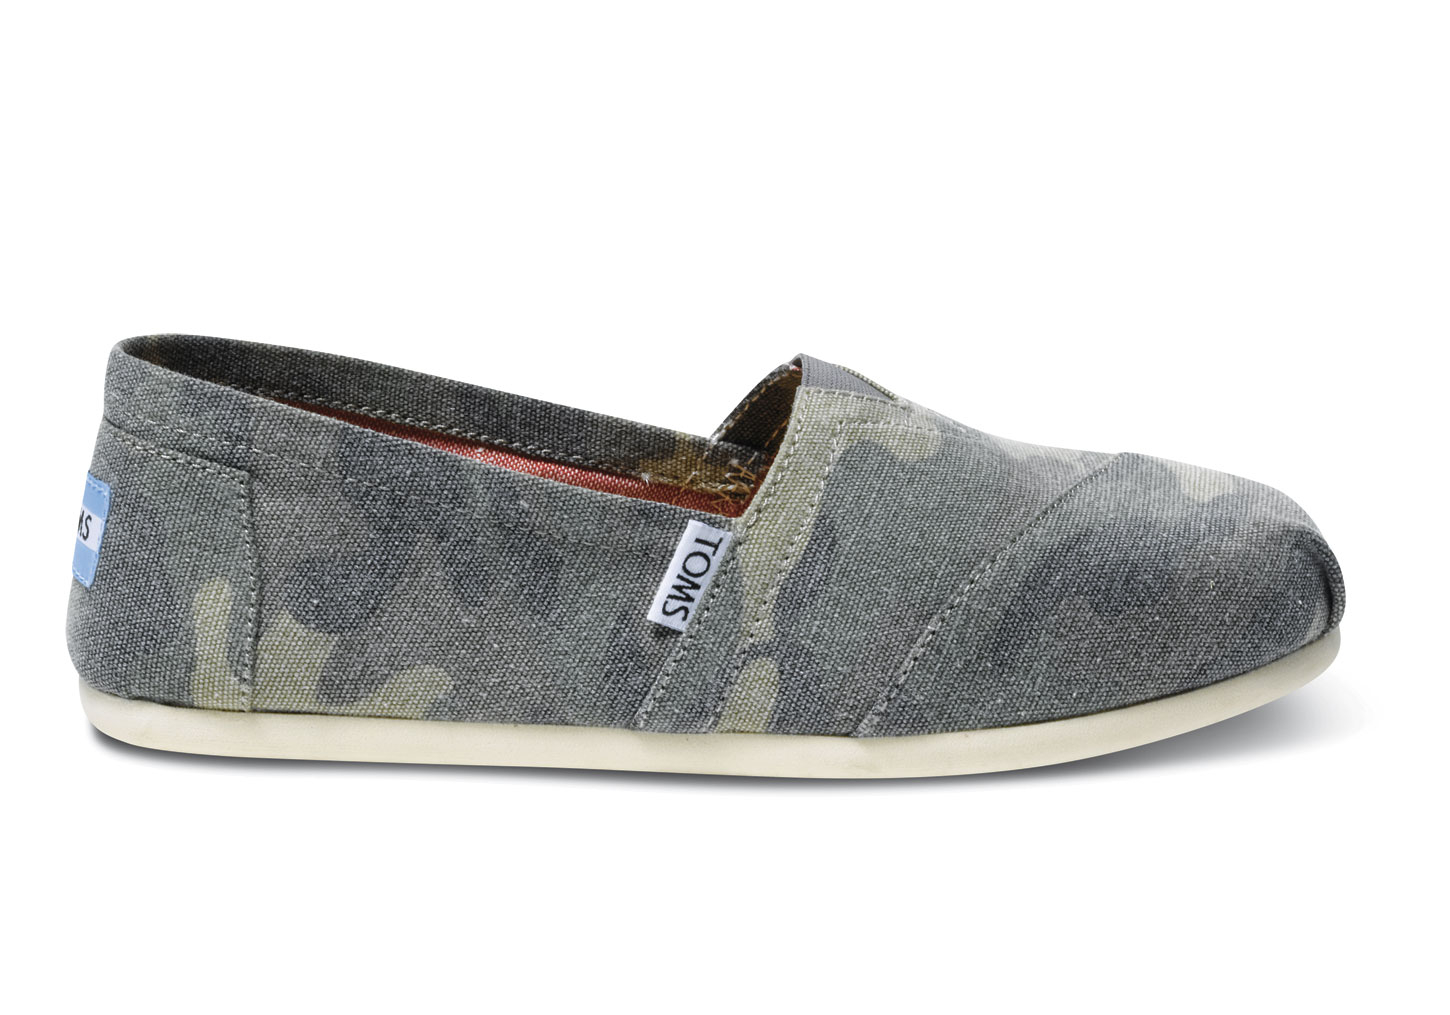 Lyst - Toms Washed Camo Canvas Women'S Classics in Green